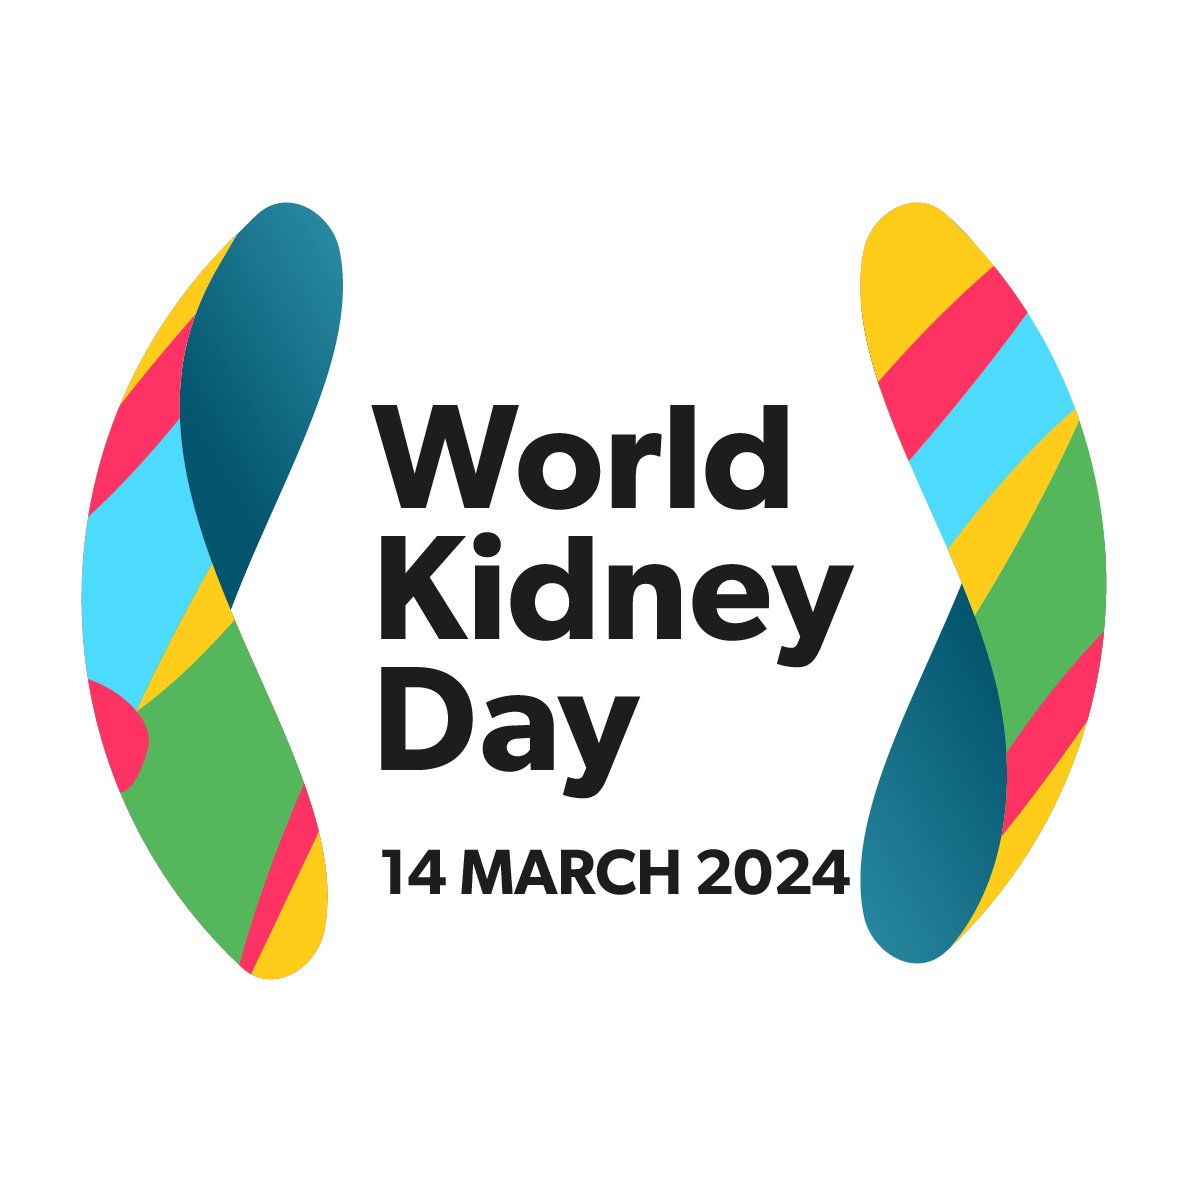 Today we commemorate #WorldKidneyDay. The campaign for this year is #KidneyHealthForAll ➡️ worldkidneyday.org/2024-campaign/ ⚠️ CKD affects 850 M people globally, causing 3.1 M deaths in 2019. Projected to be the 5th leading cause of years of life lost by 2040, CKD requires attention